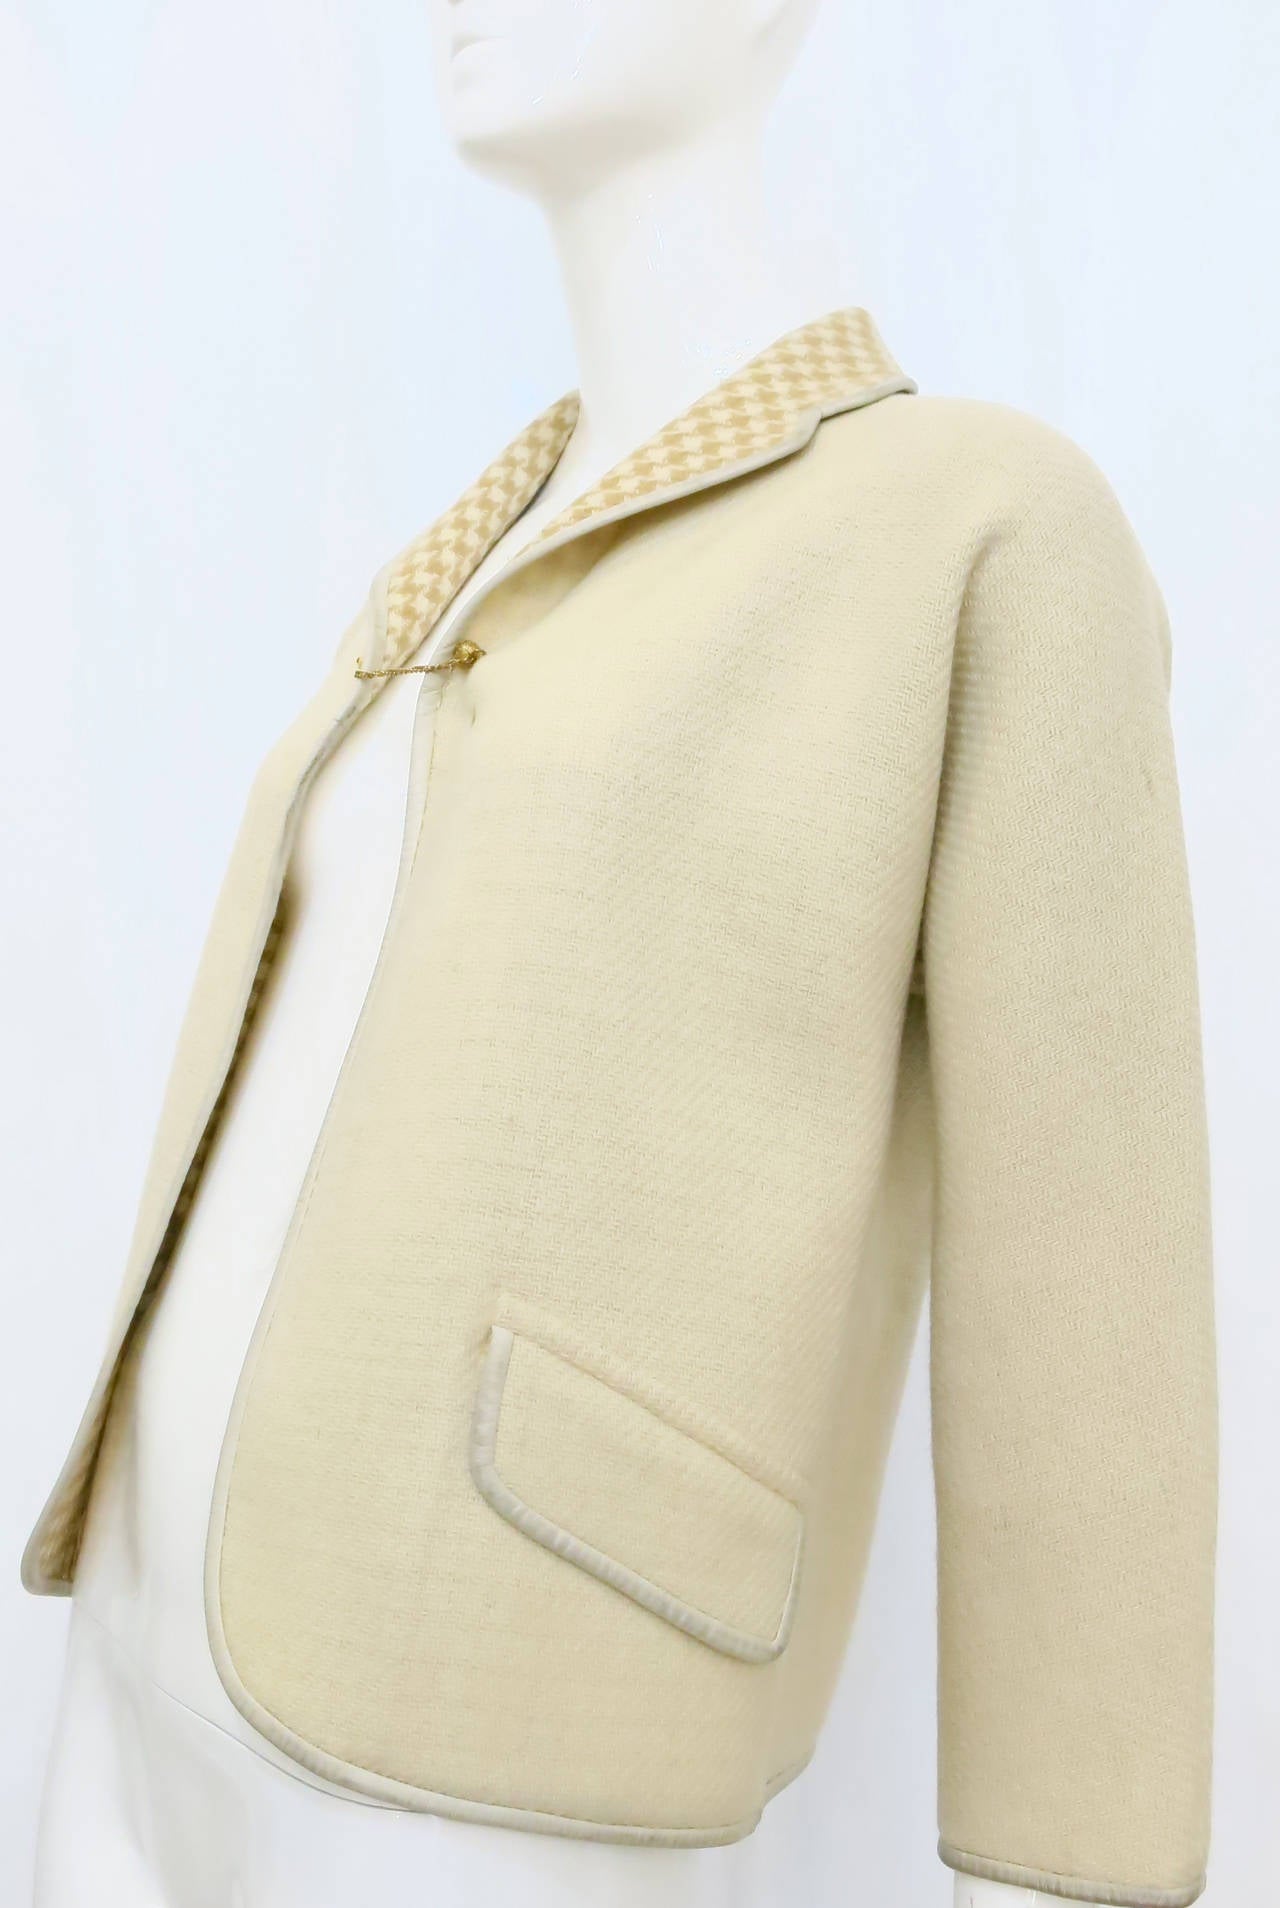 1960s Bonnie Cashin Cream and Houndstooth Wool Jacket with Gold Chain Closure In Fair Condition For Sale In Brooklyn, NY